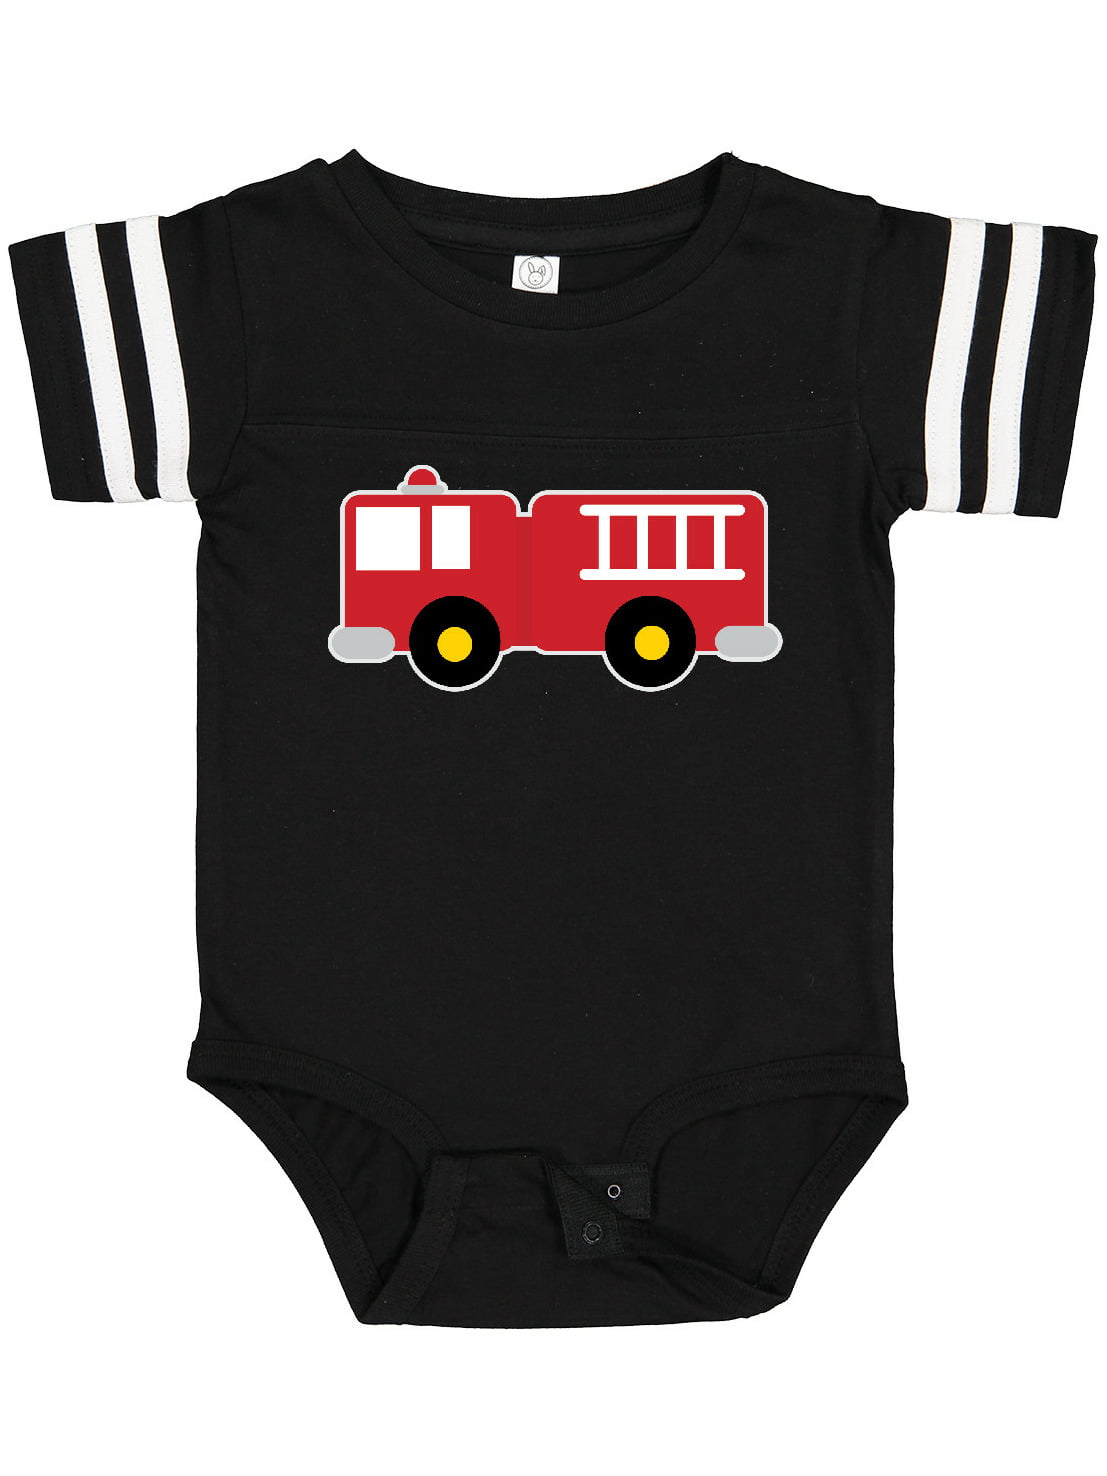 Little Fire Fighter Baby Onesie Fire truck Bodysuit Fireman Shirt Baby Clothes Newborn Coming Home Outfit Cotton brother Baby Shower Gift